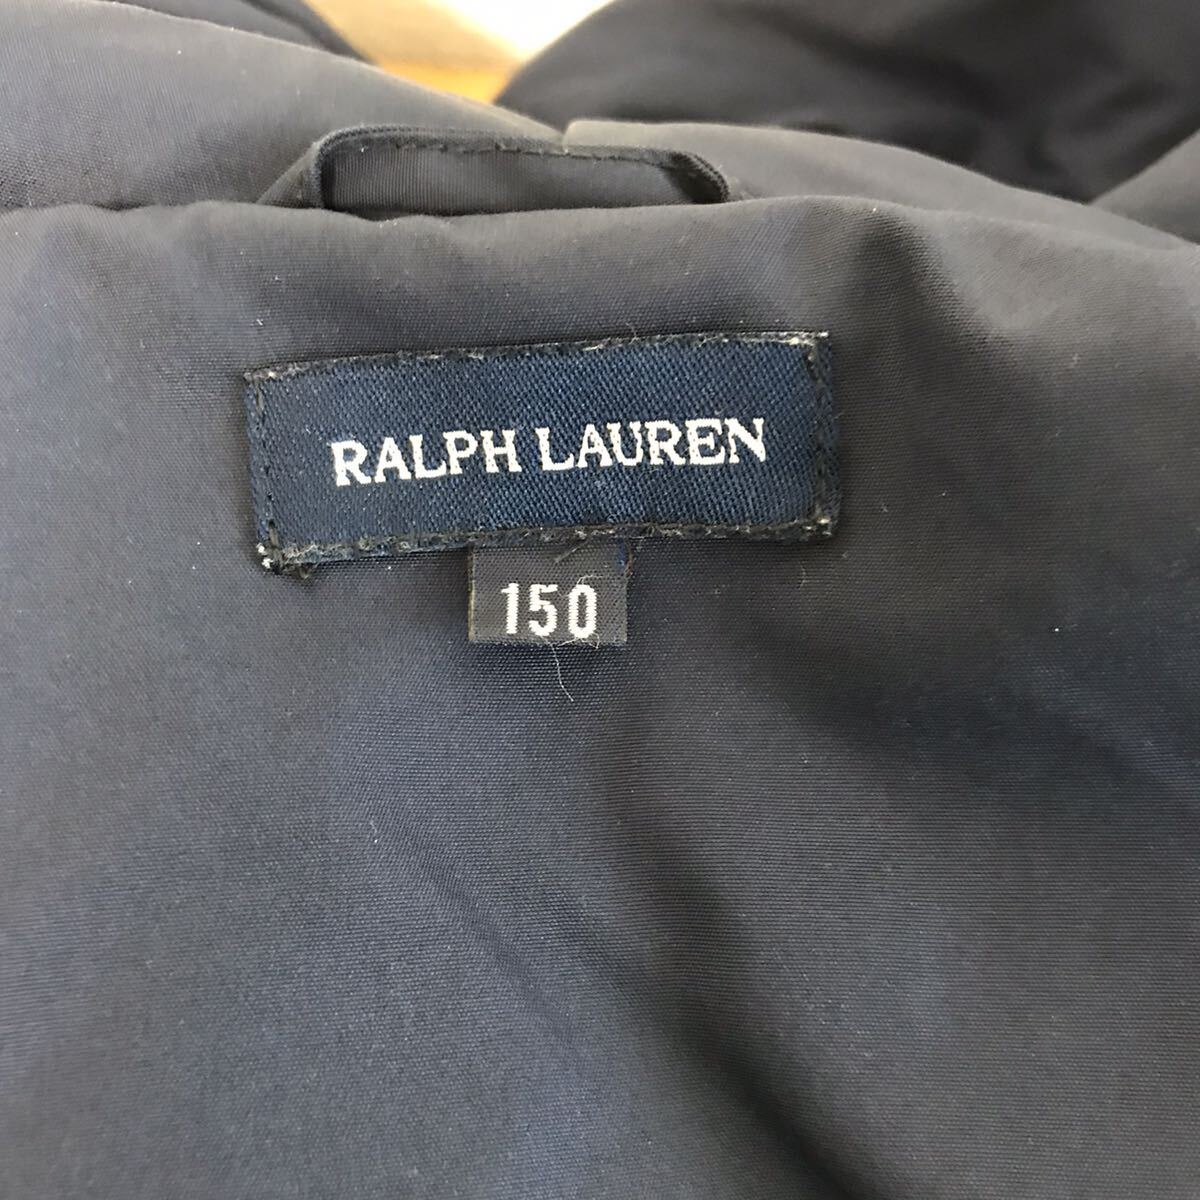 5-112 POLO RALPH LAUREN Polo Ralph Lauren Ralph Lauren down jacket down jacket Kids navy navy blue color outer 150